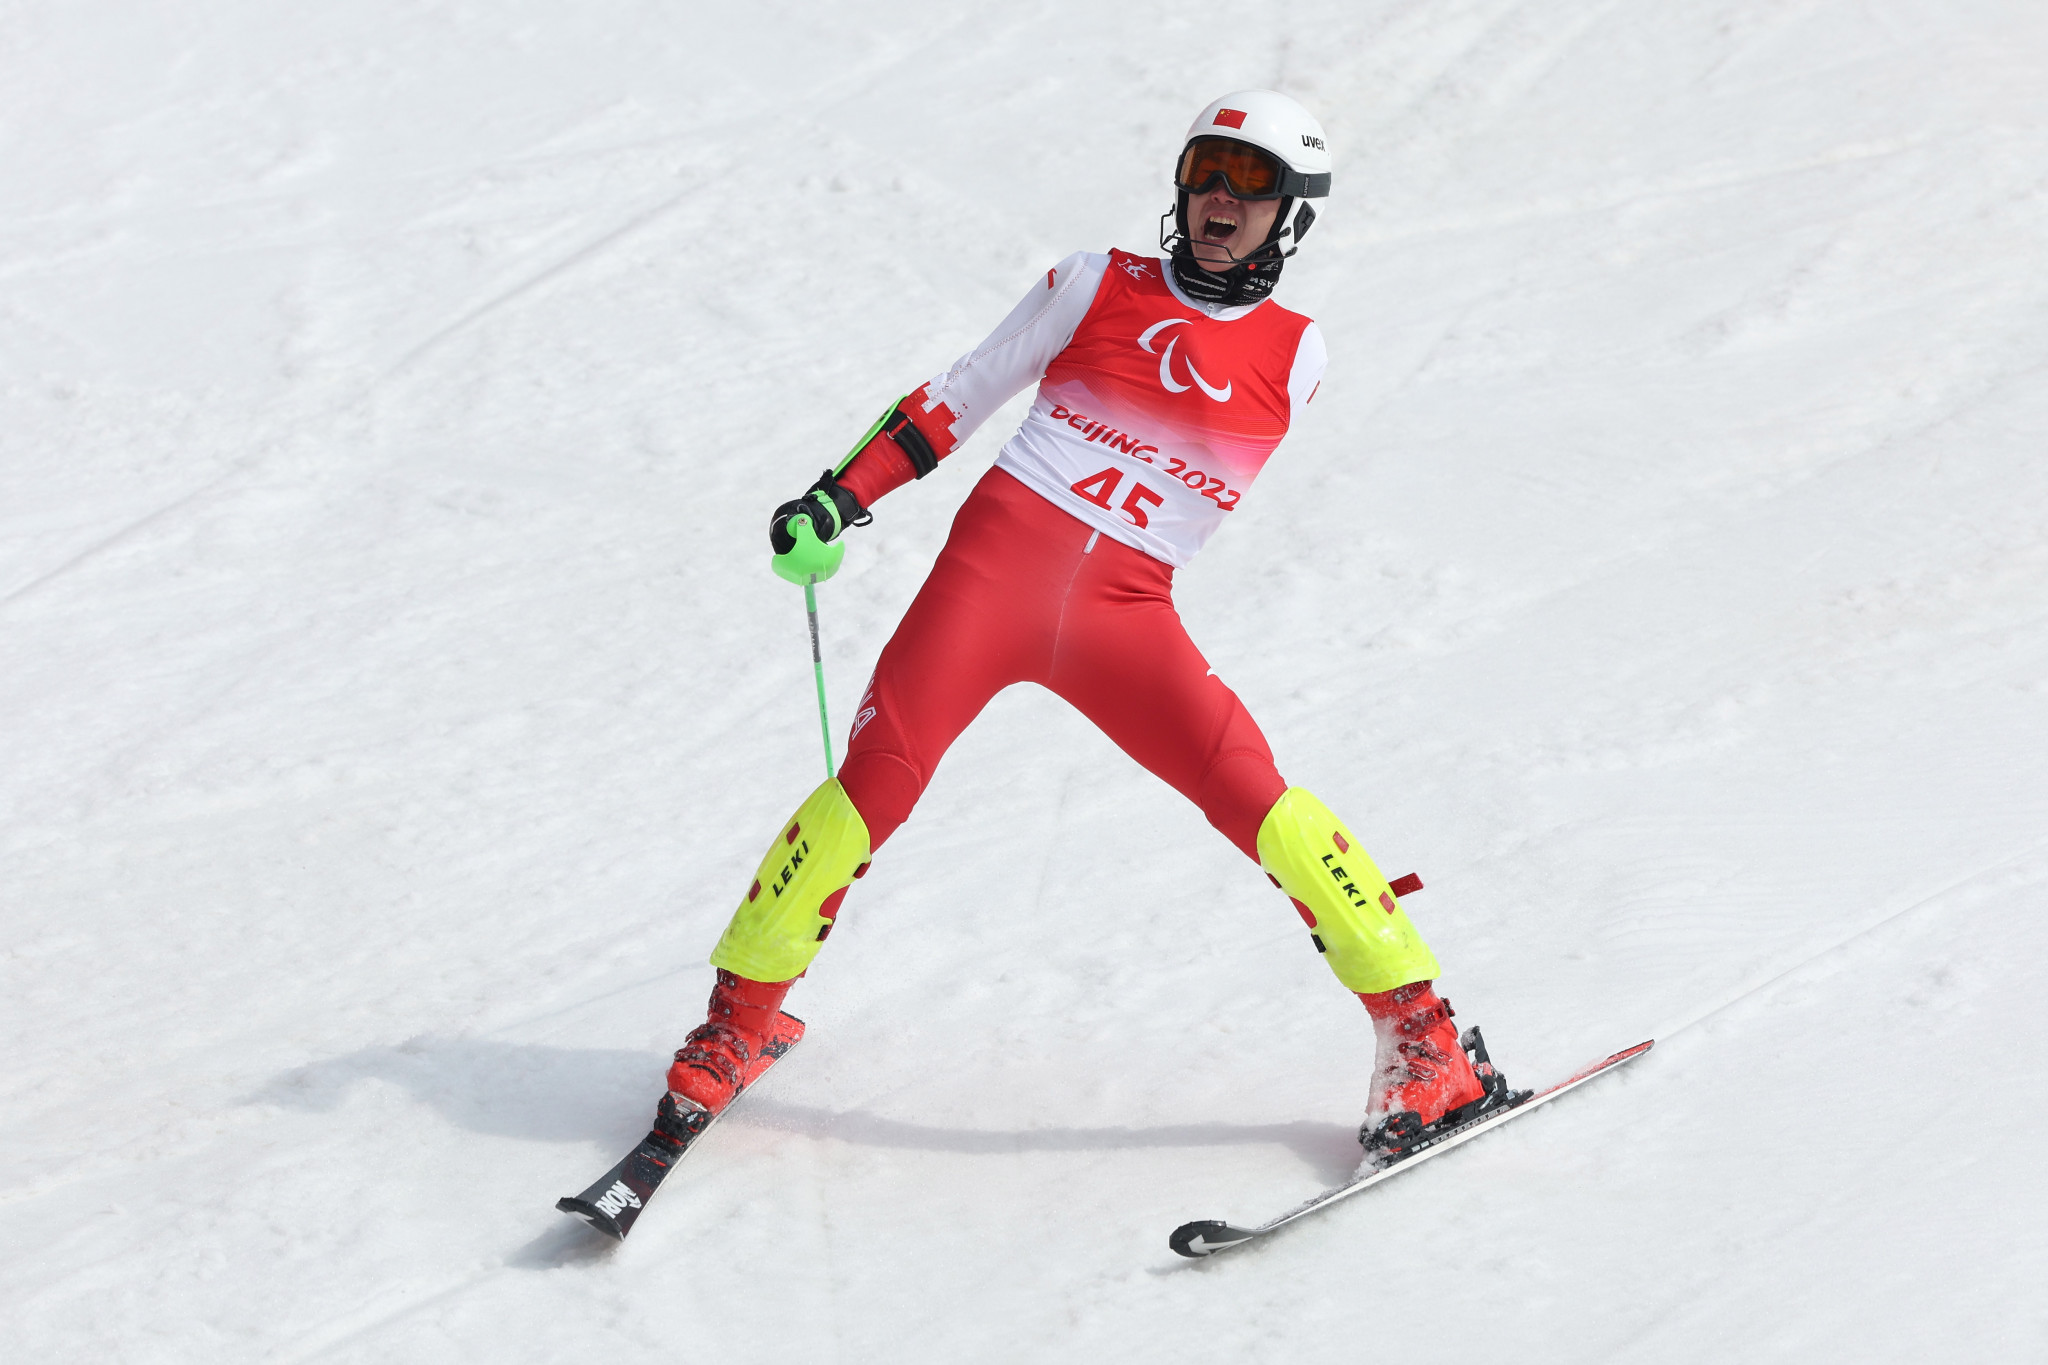 Liang Jingyi claimed the final medal for China with a silver in the Alpine skiing men's slalom standing ©Getty Images